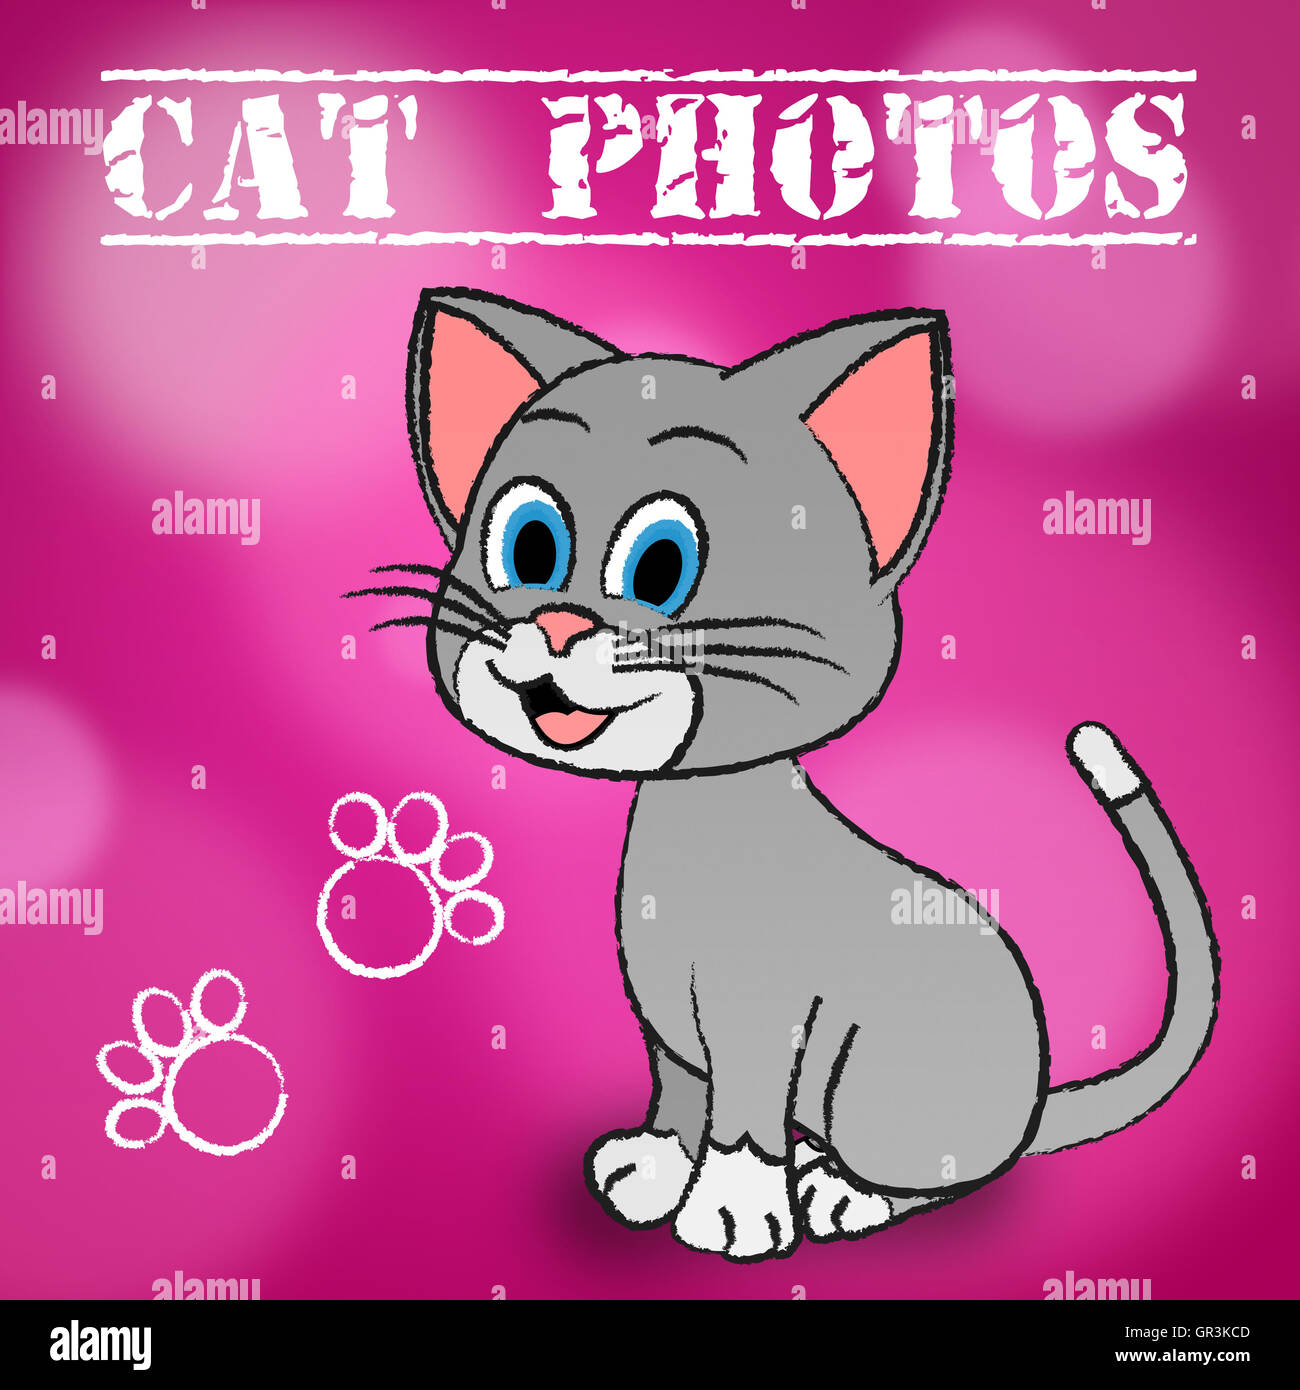 Cat Photos Meaning Cameras Pictures And Snapshots Stock Photo